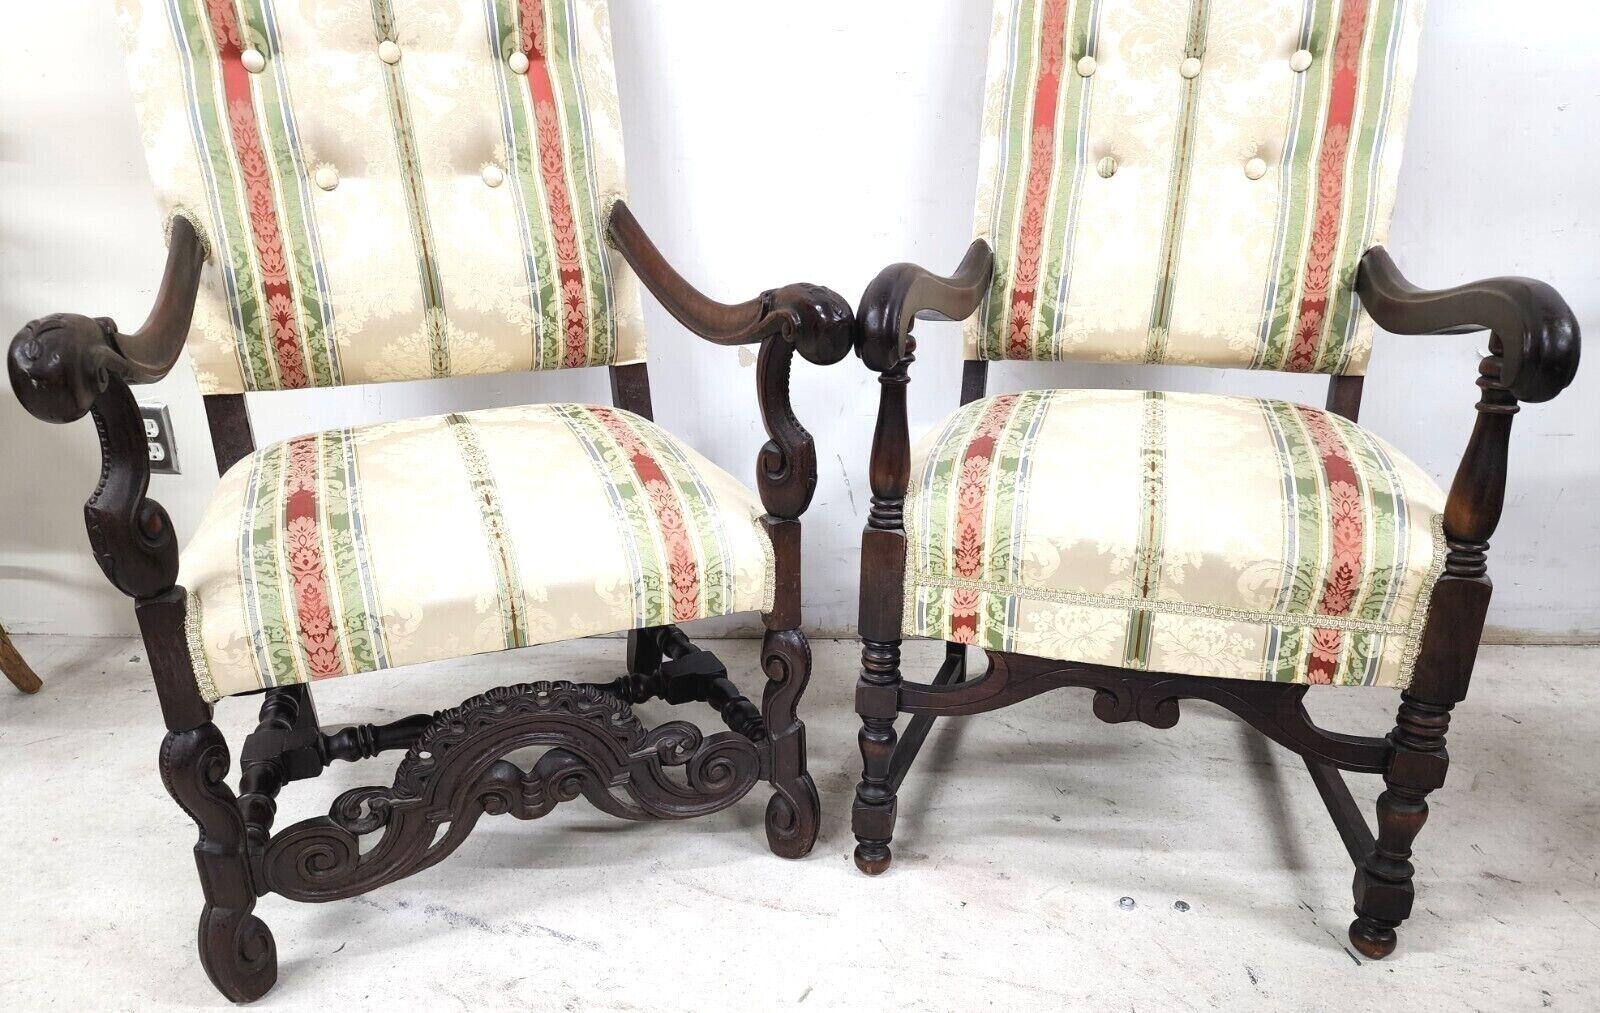 Offering one of our recent palm beach estate fine furniture acquisitions of a
Pair of antique 1800s his/king & her/queen french throne statement chairs 

Approximate measurements in inches
His:
46.5